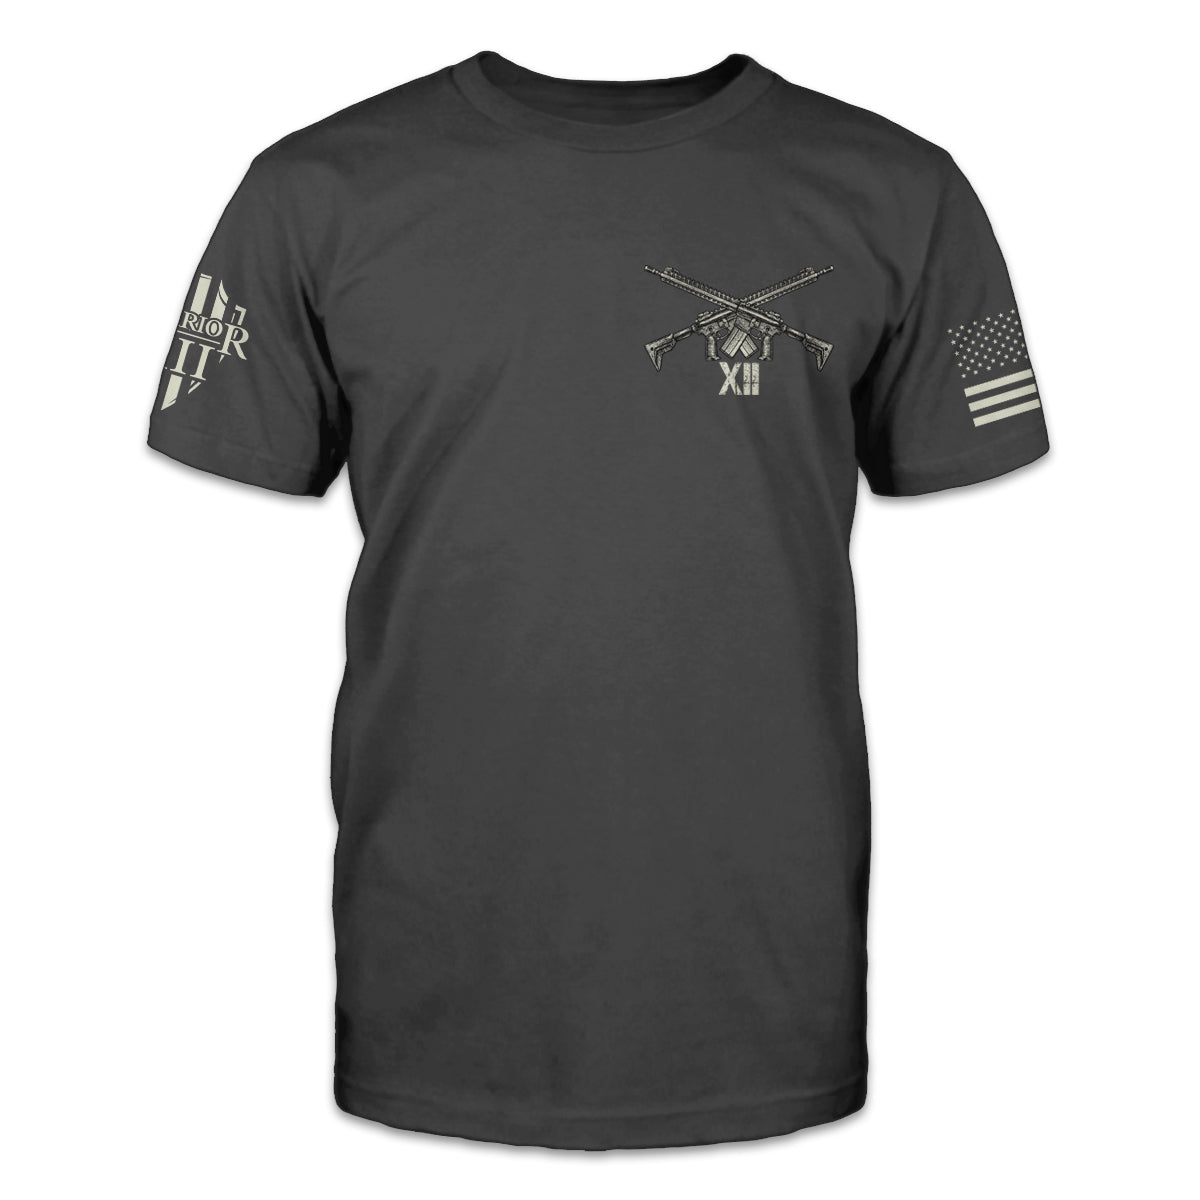 A dark grey t-shirt with two AR15's crossed over printed on the front left side of the chest.